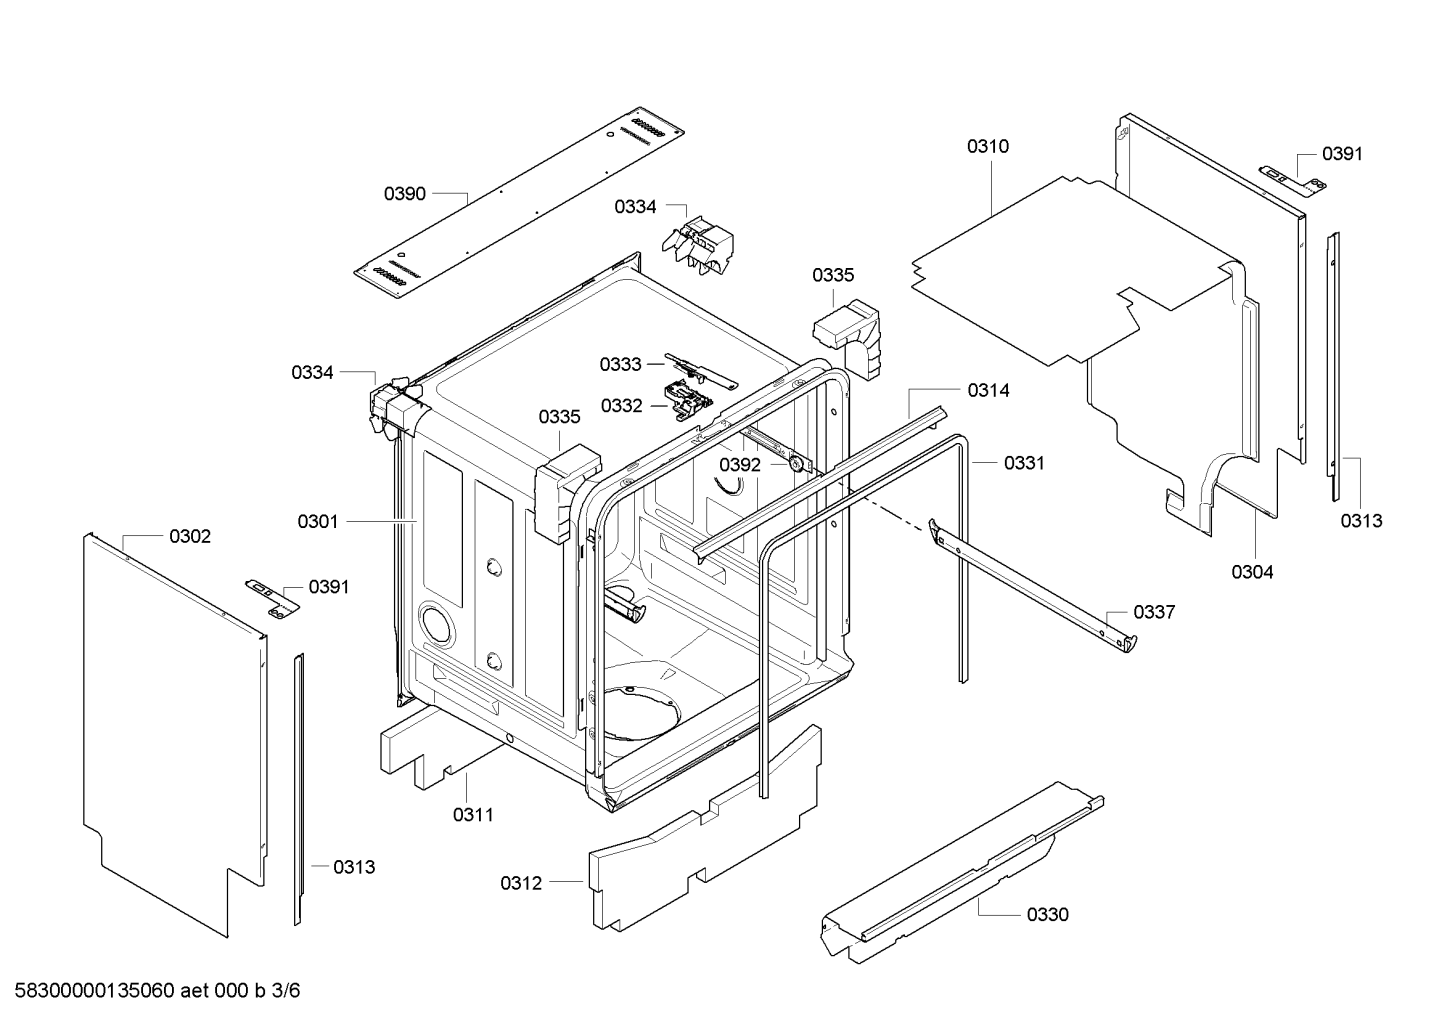 drawing_link_3_device_1656181